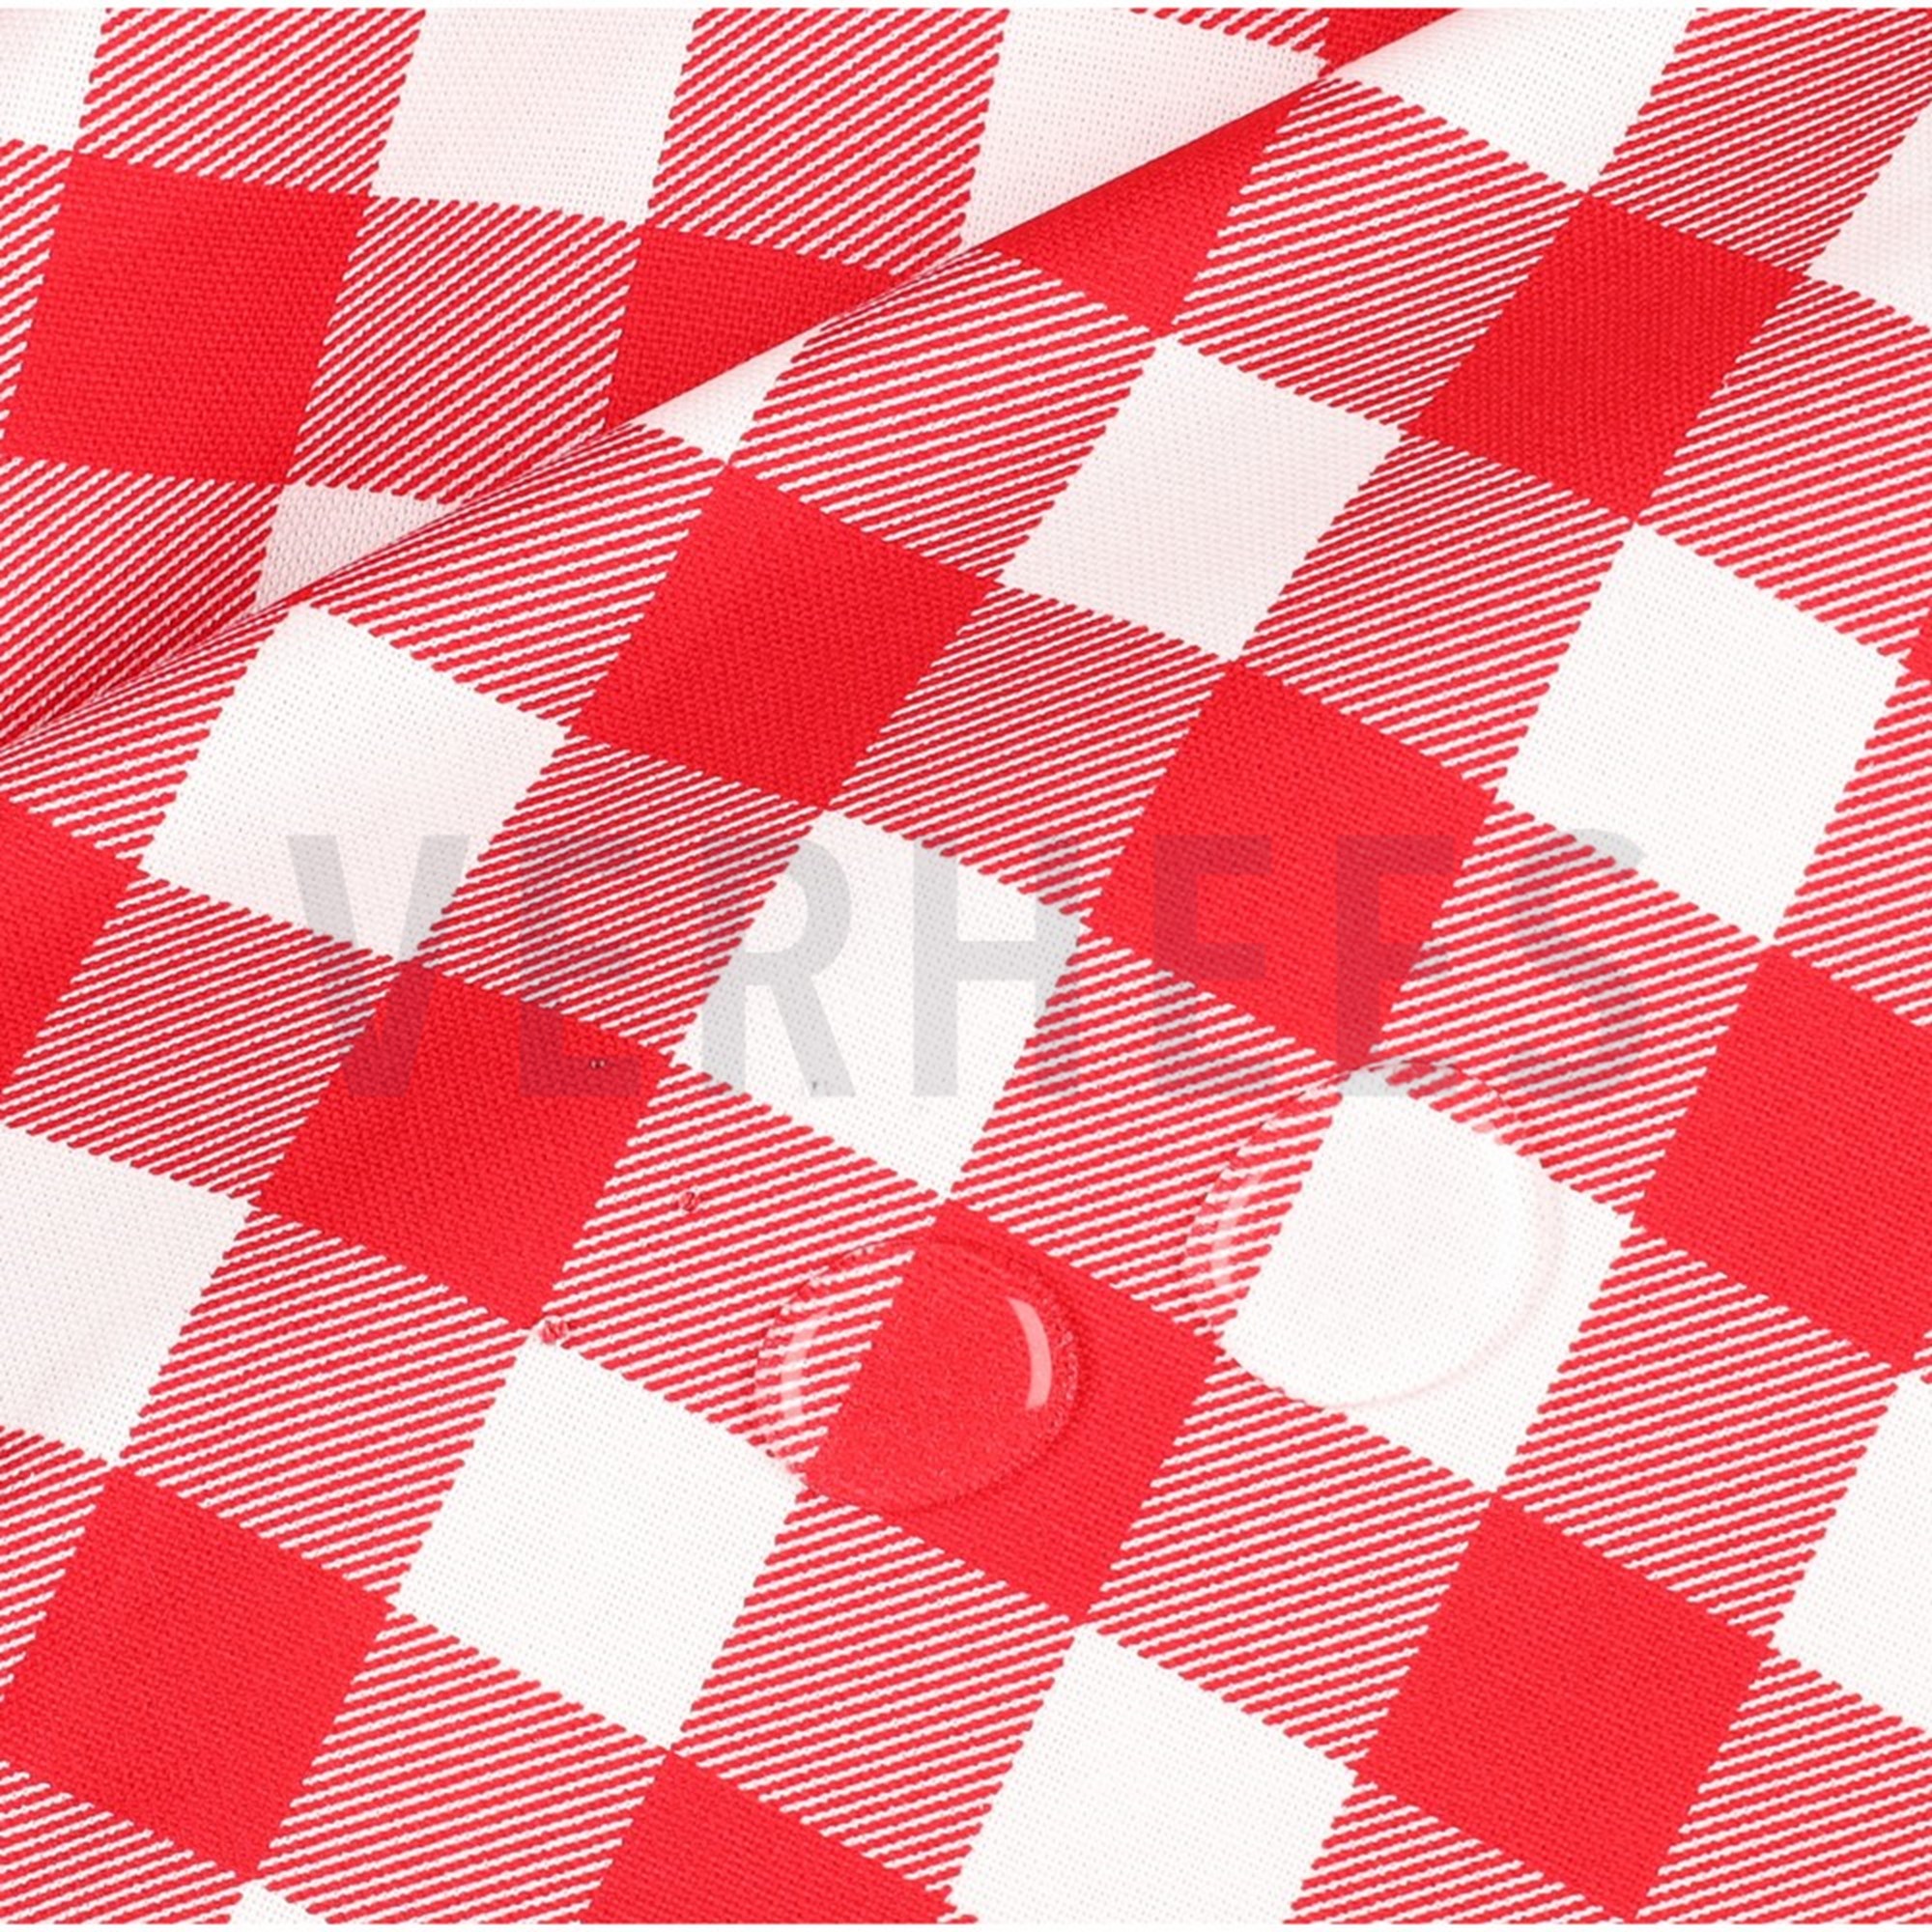 CANVAS WATERPROOF CHECK RED (high resolution) #3